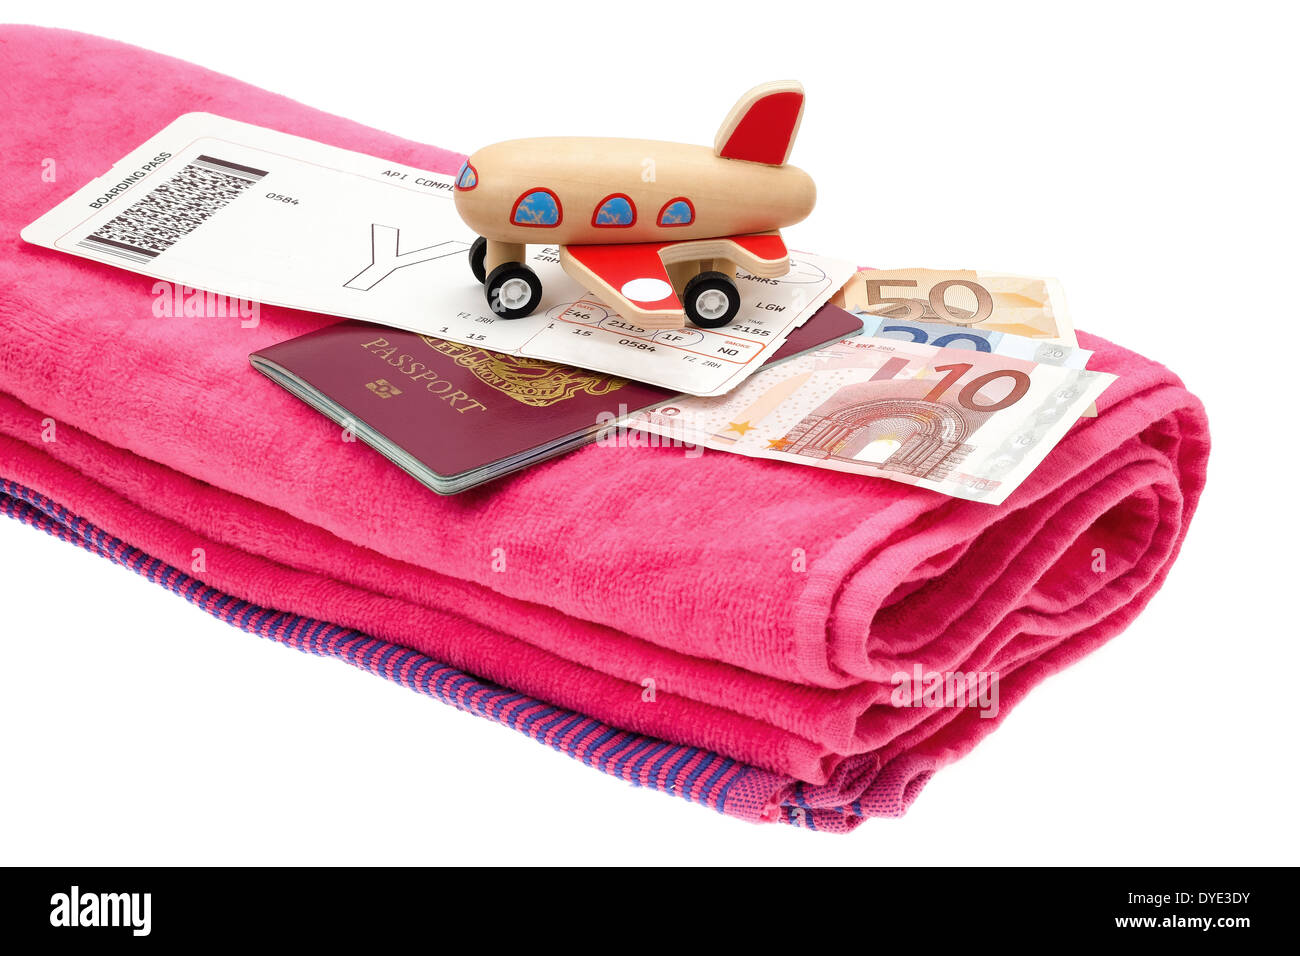 Holiday and travel concept image of a small aircraft placed onto a passport with money, an airline boarding card and towel. Stock Photo